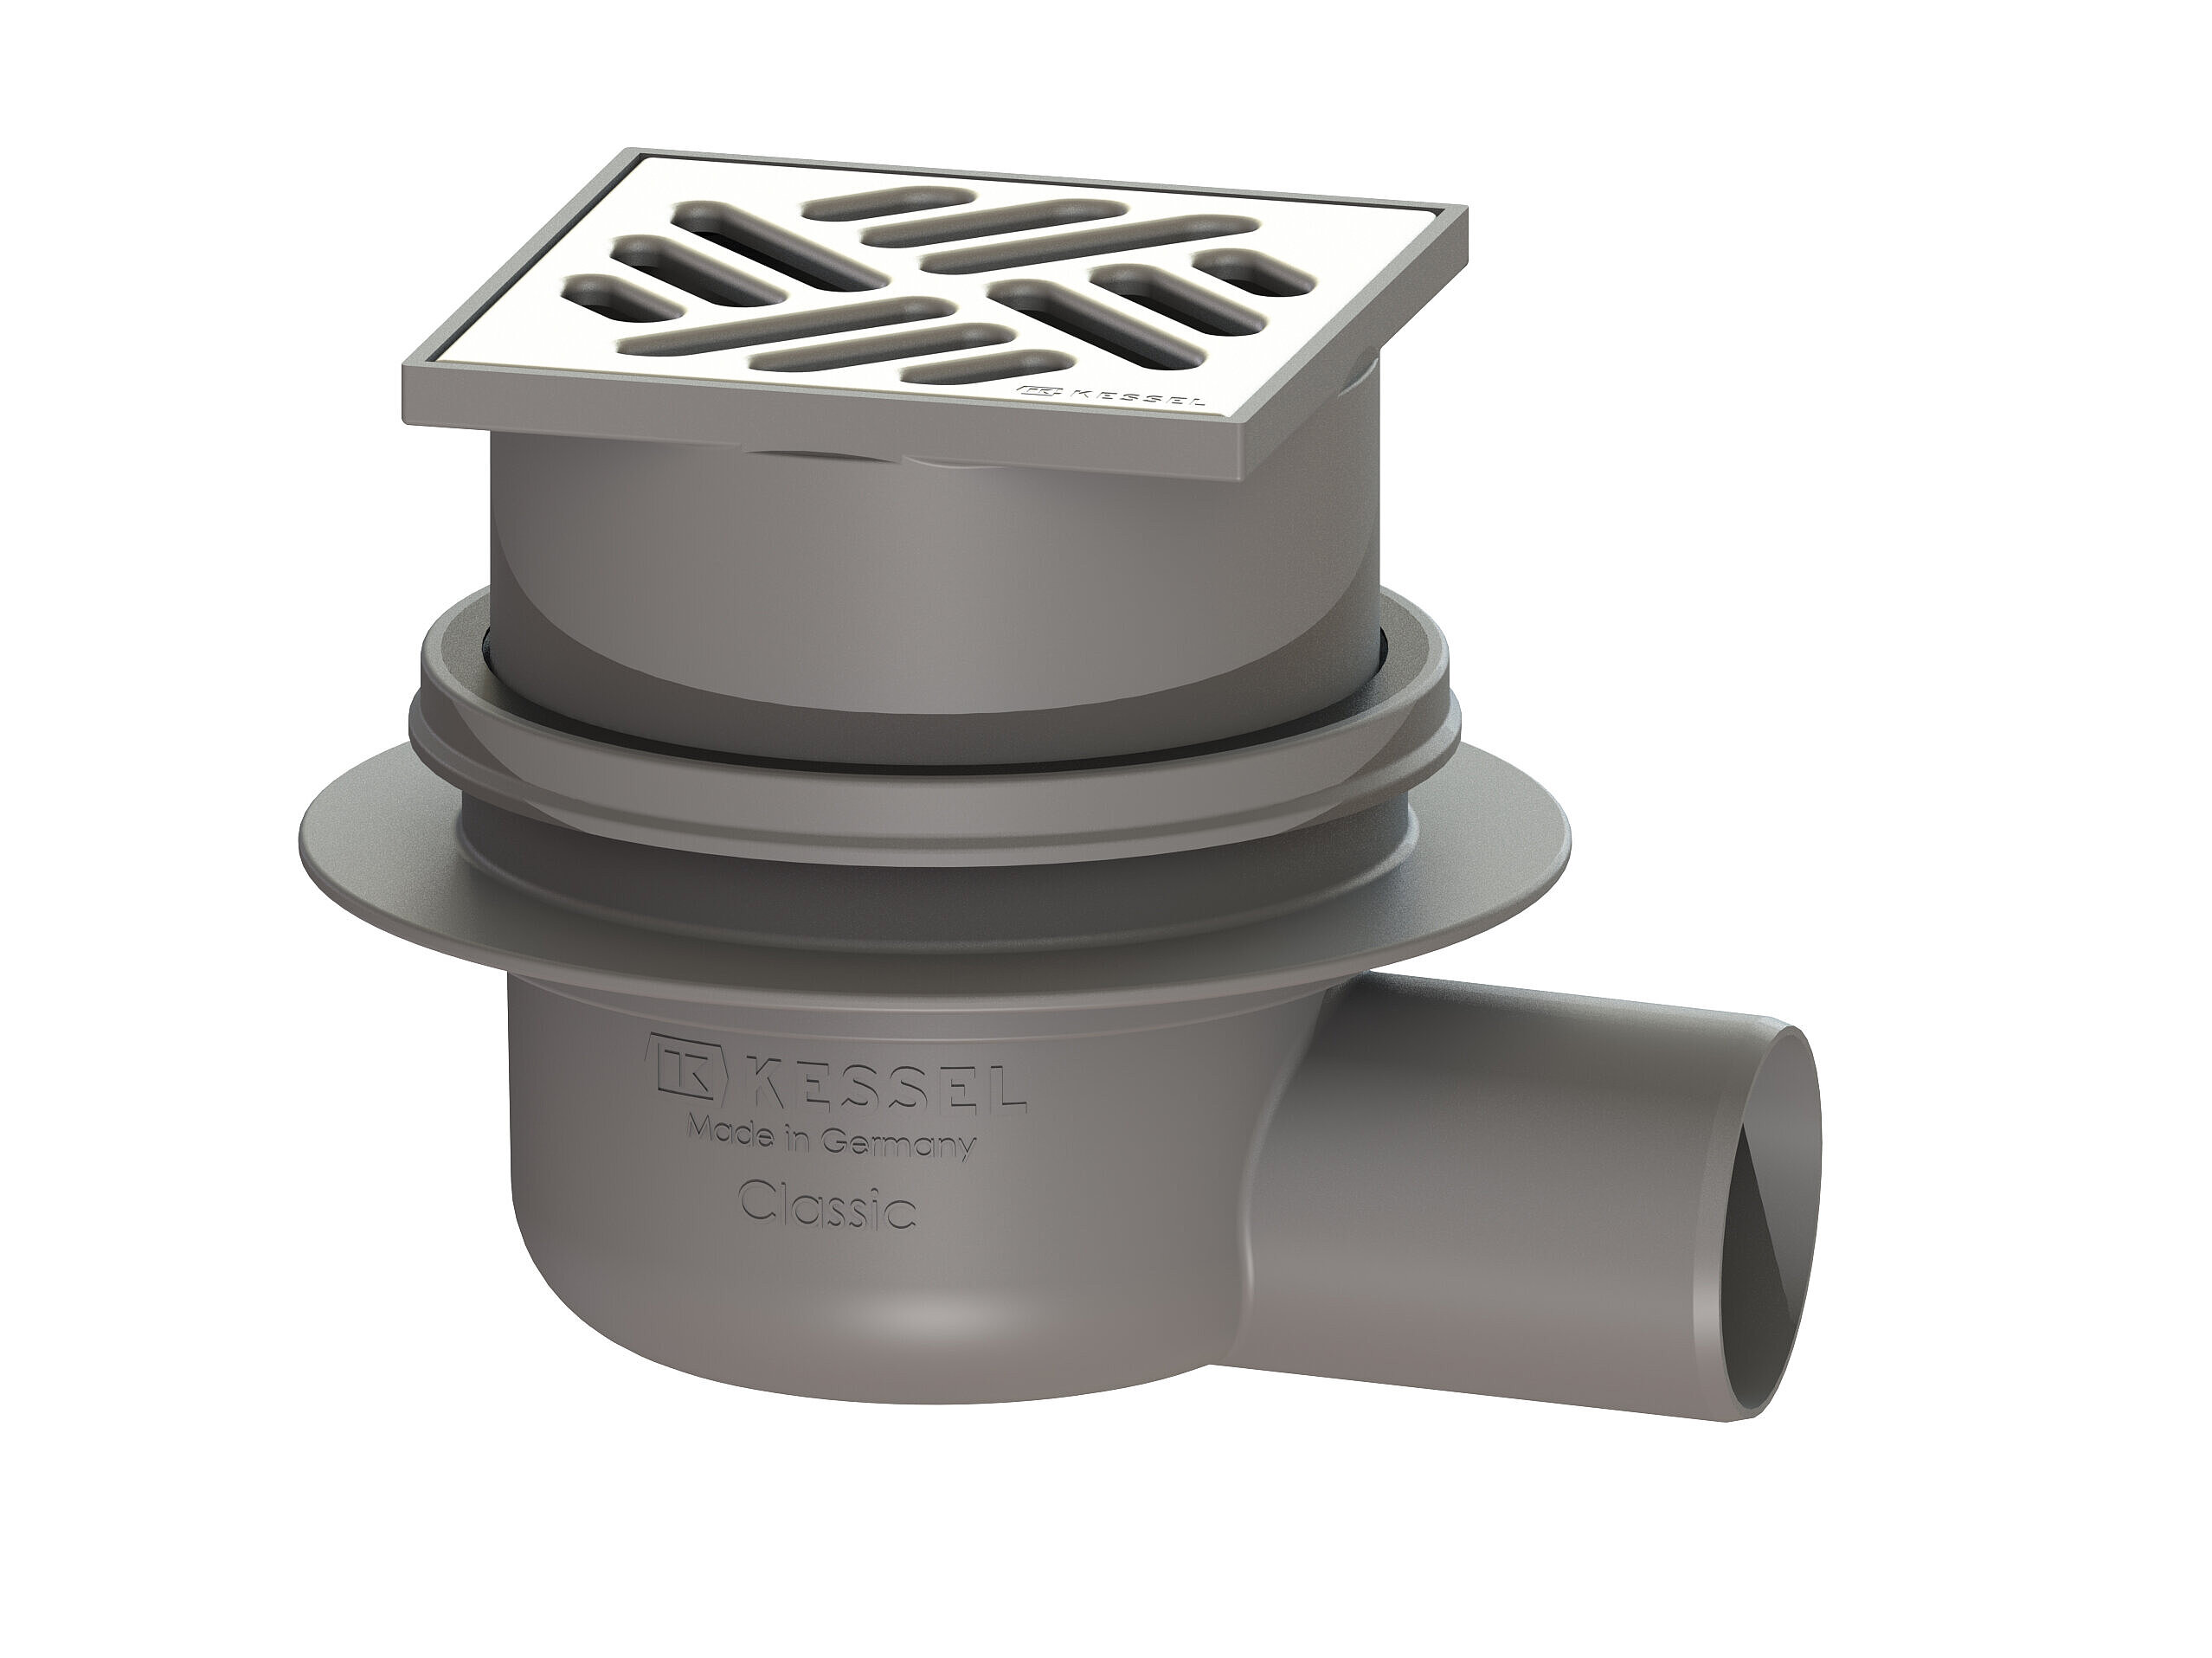 Classic bathroom drain with a horizontal outlet and an upper section with a slotted cover